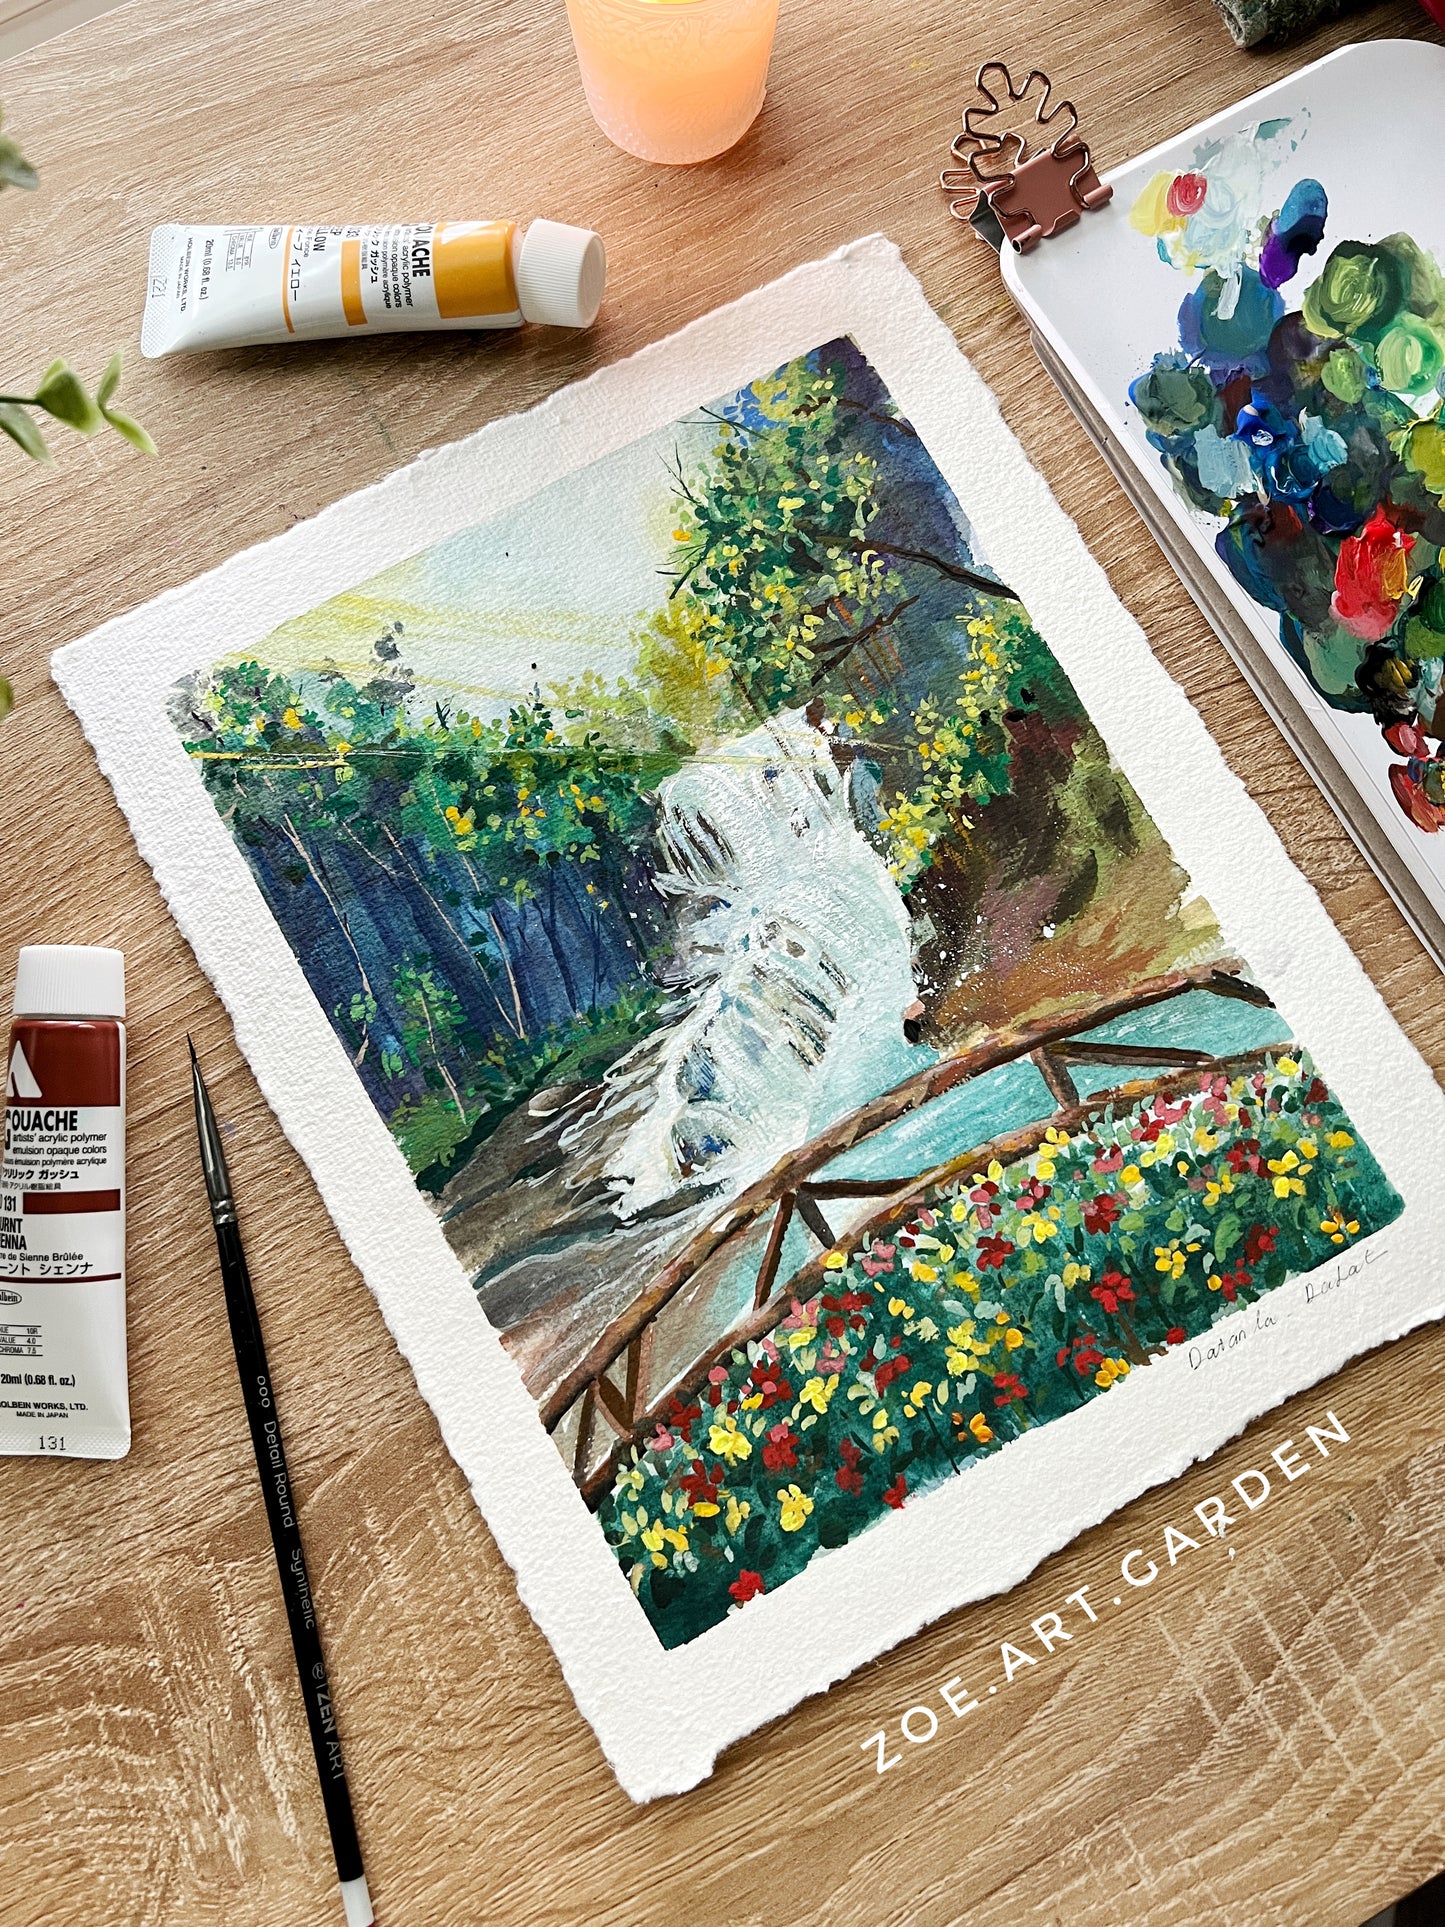 Your complete in-depth guide to gouache painting - Gathered